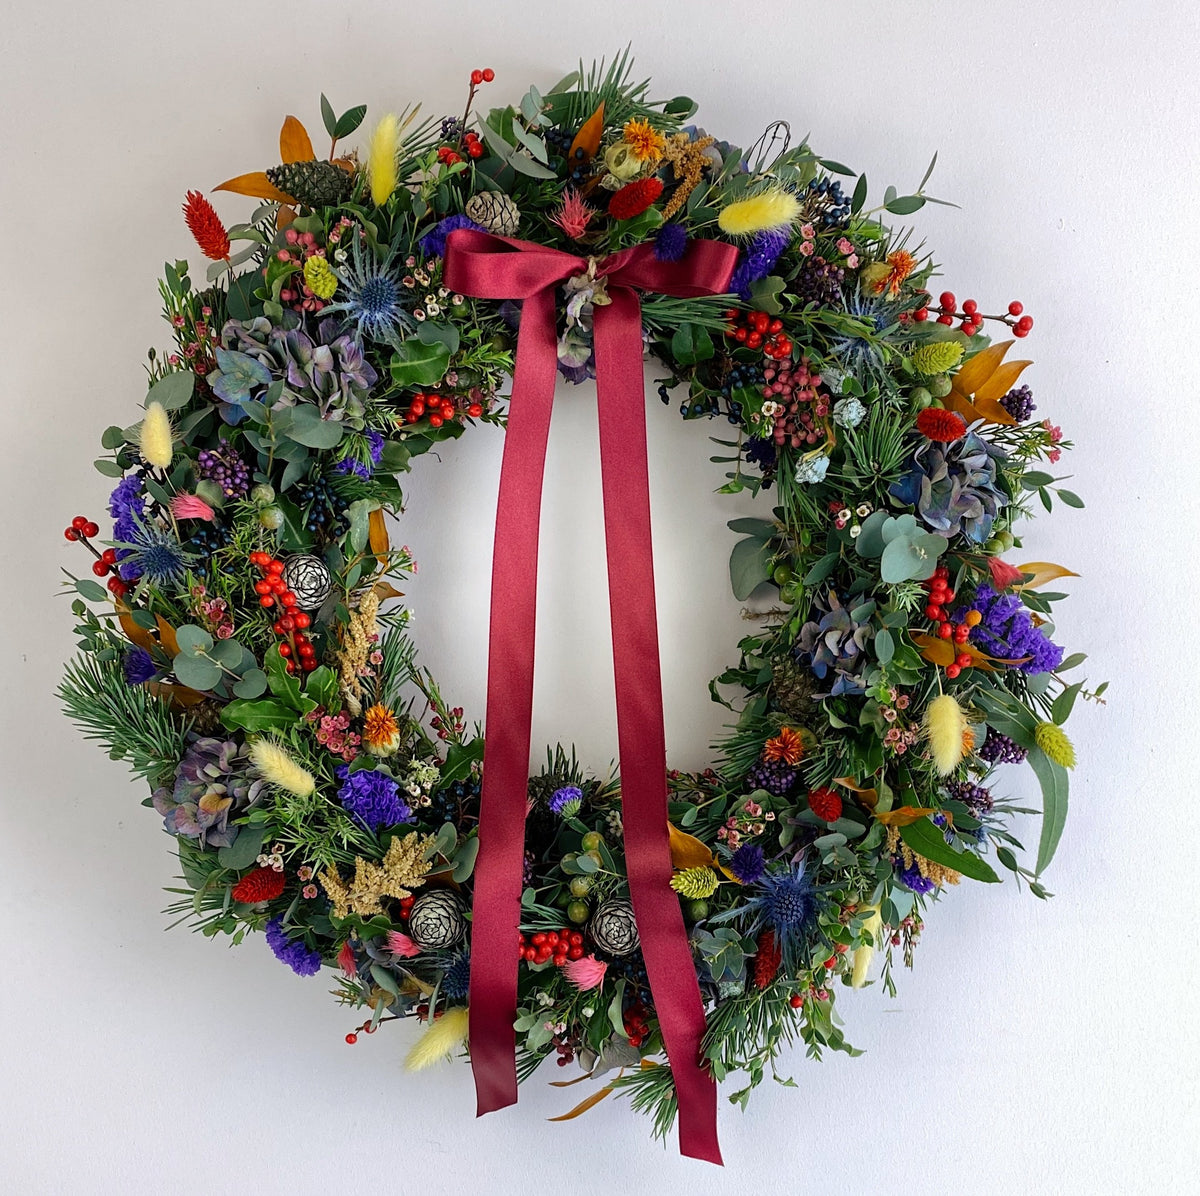 Get your wreath on! Introducing our new Christmas wreaths